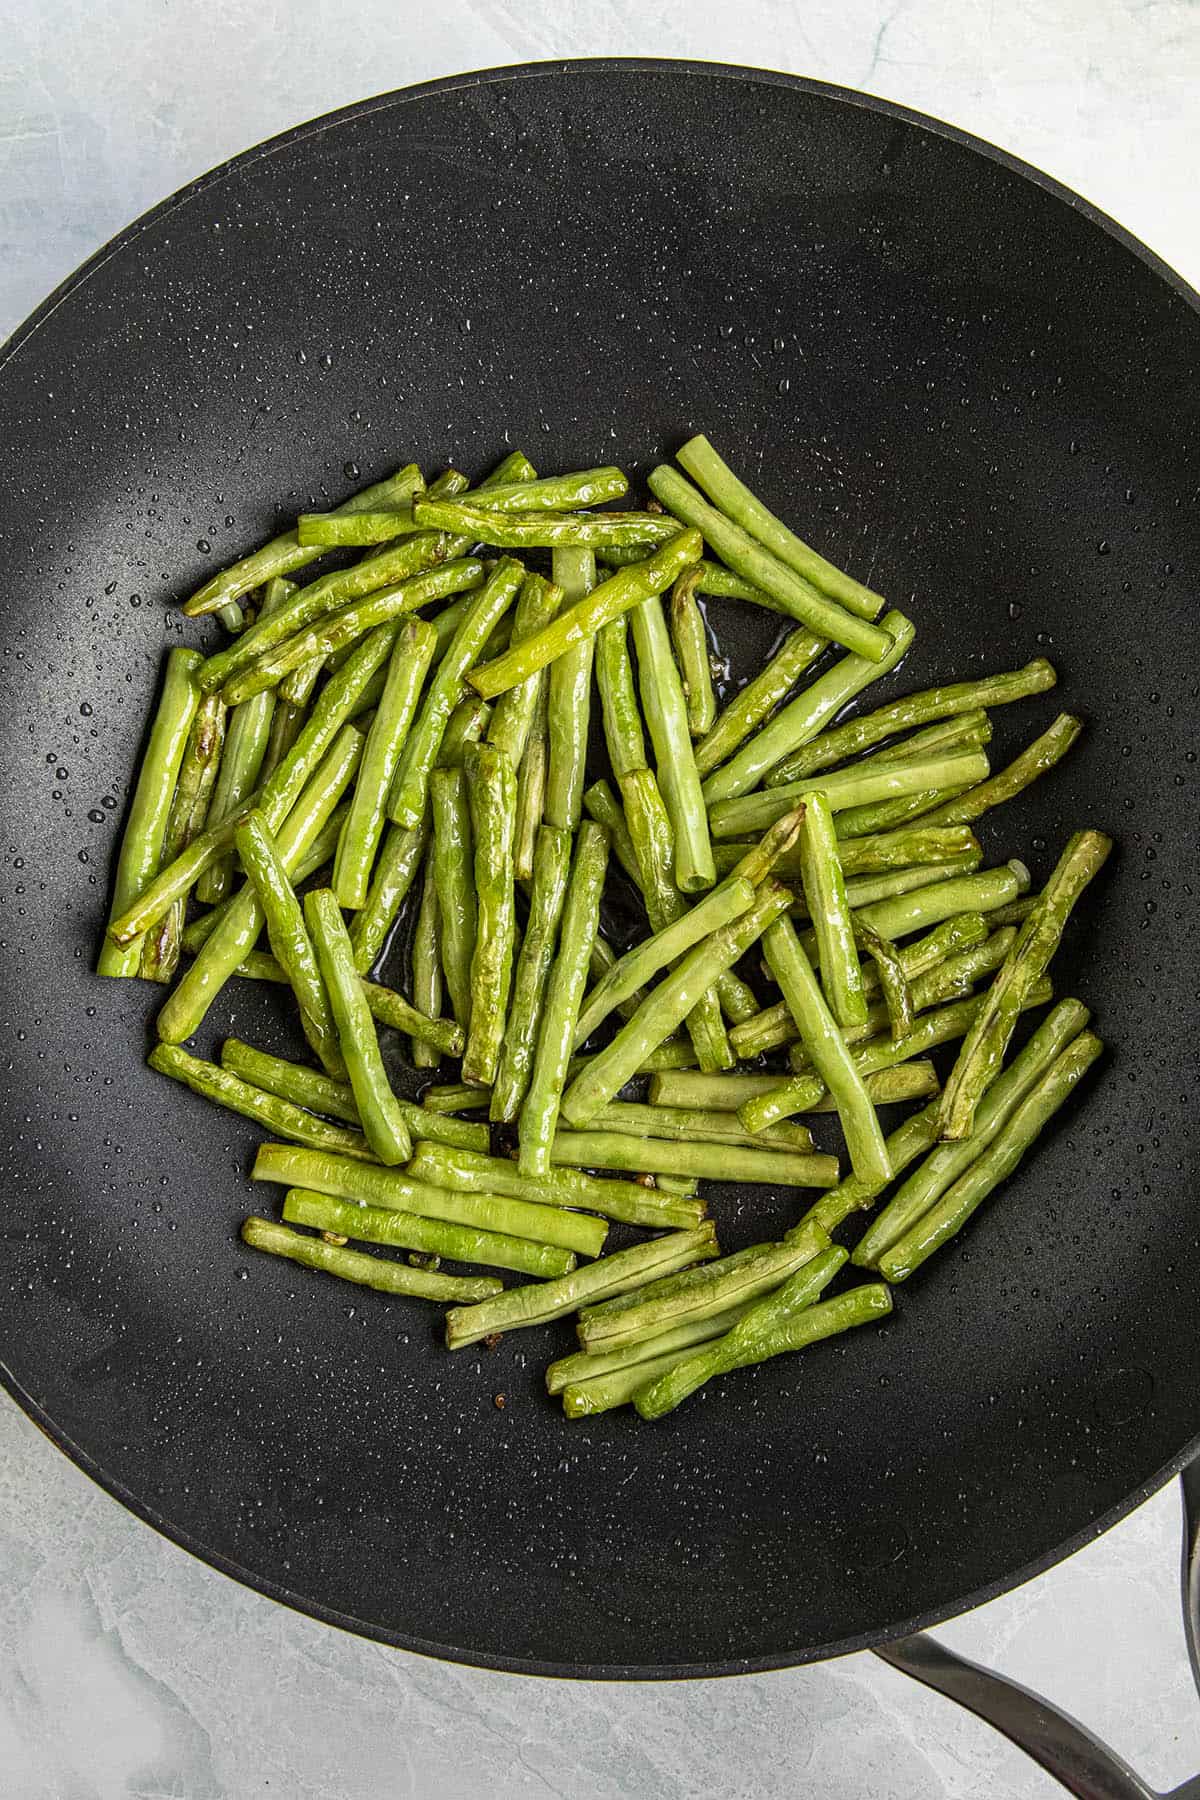 Cooking the long beans in a hot pan